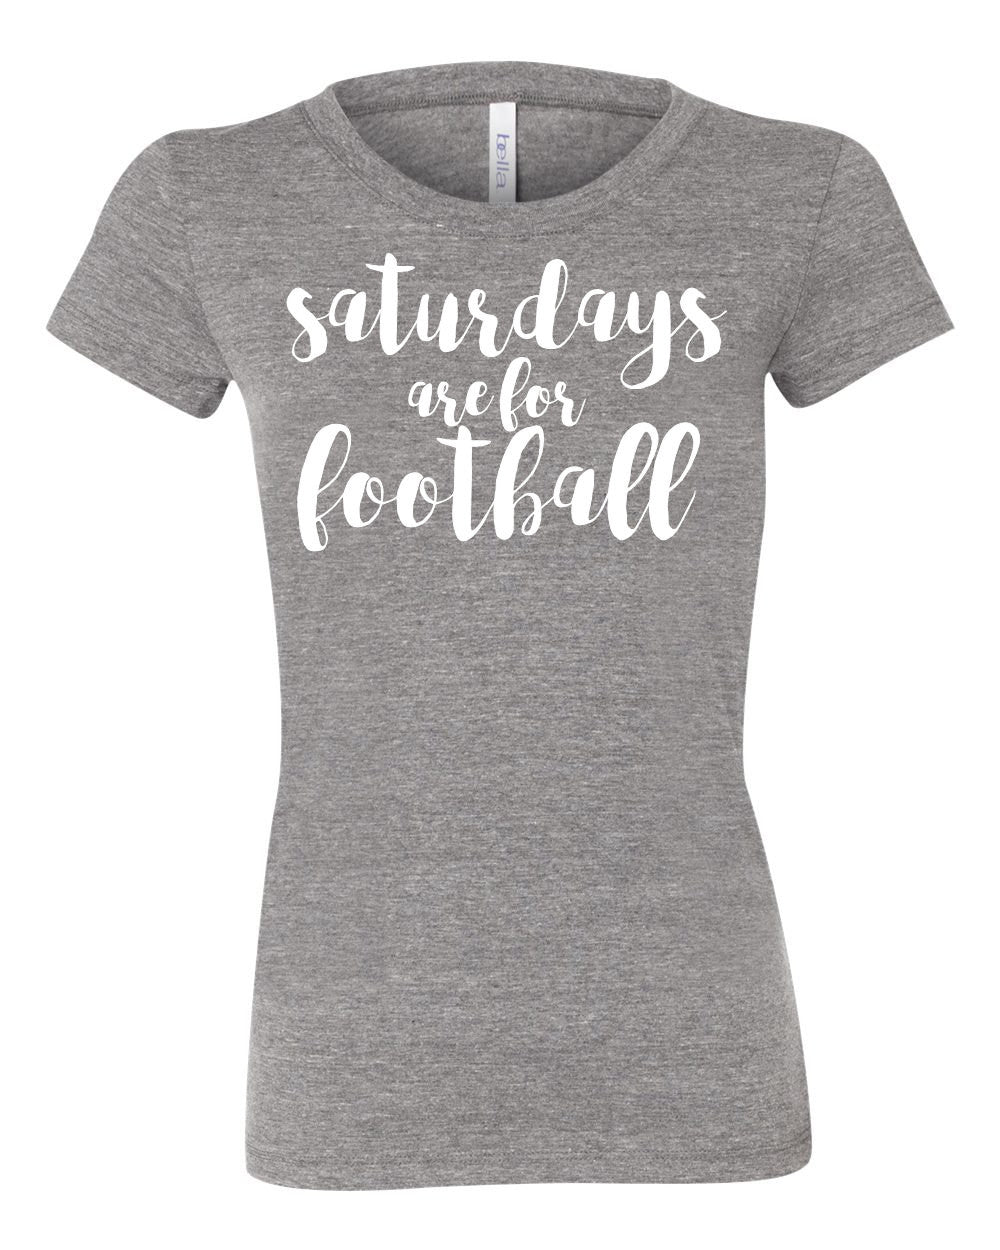 Saturdays Are For Football Tee - Mattie and Mase